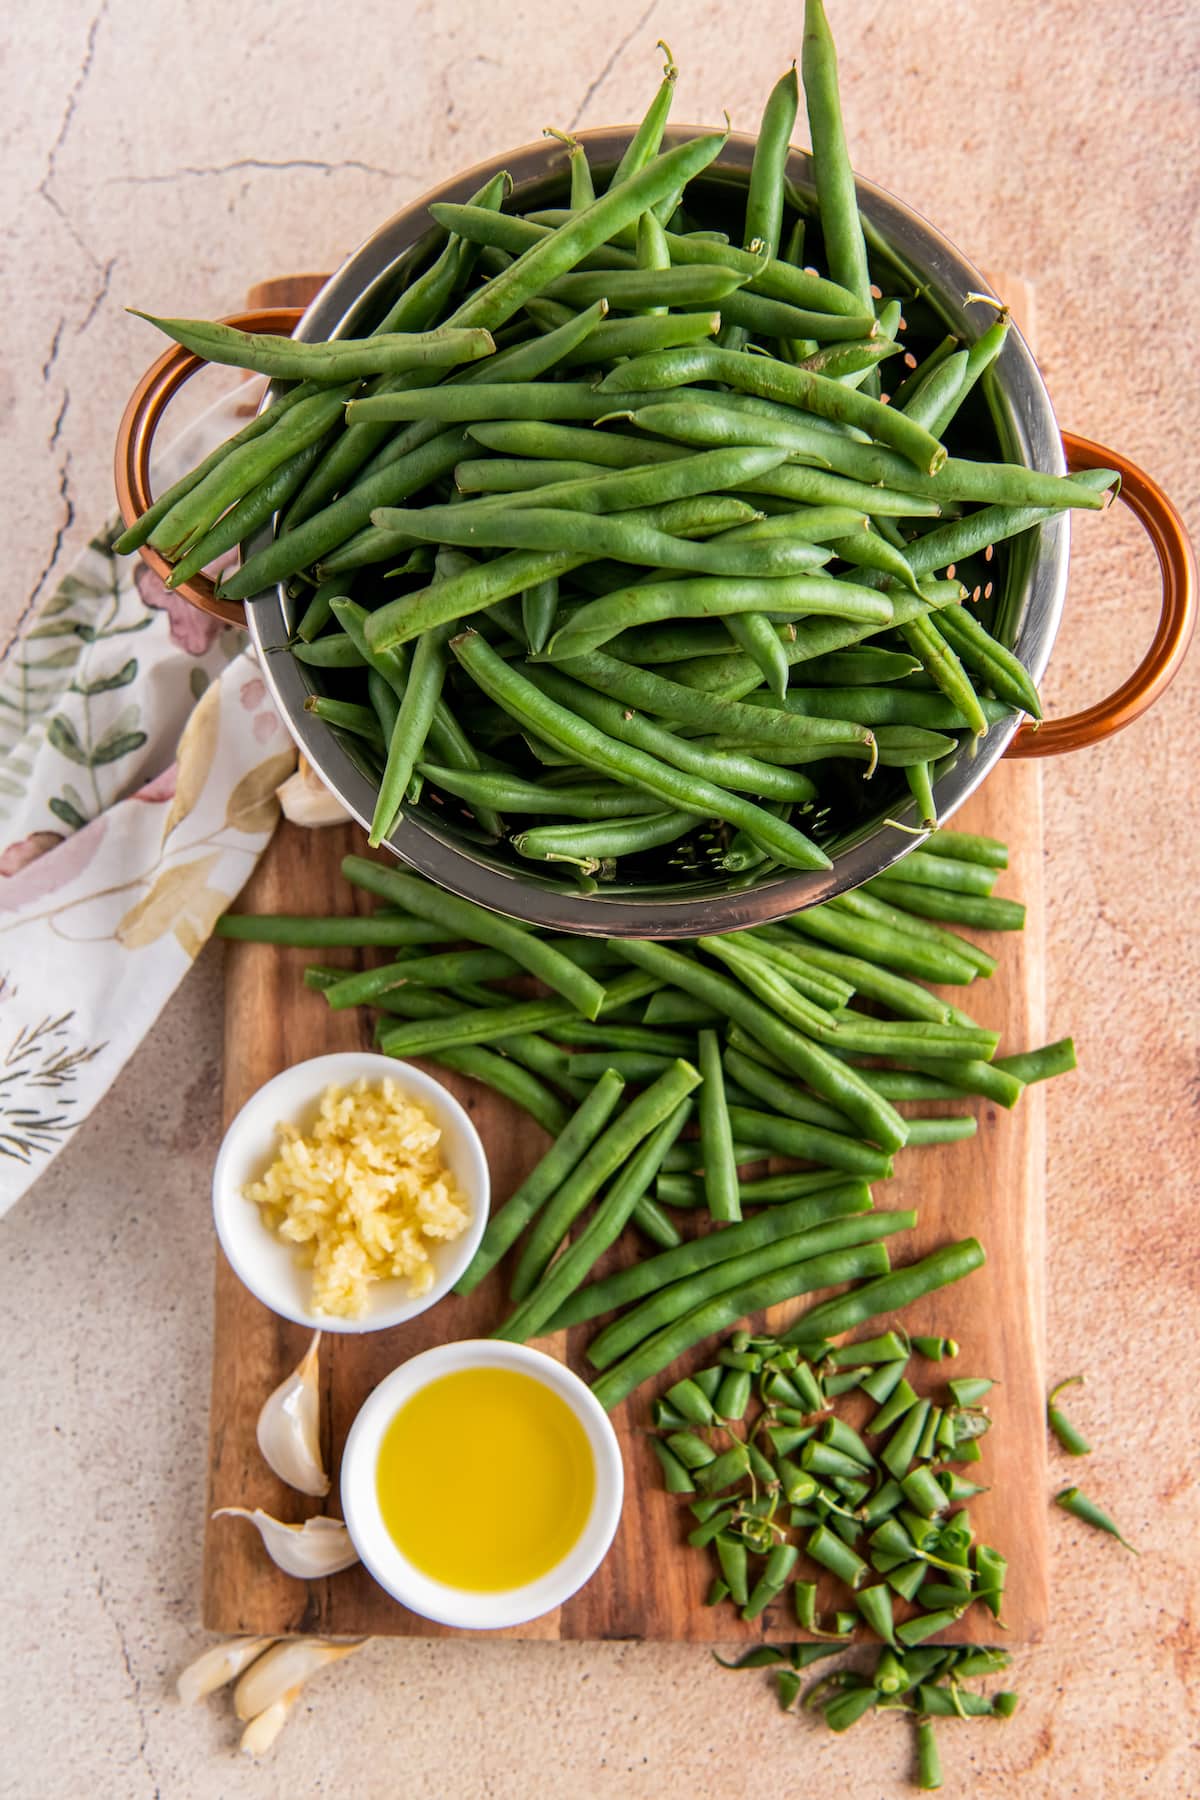 green beans on a cutting board with garlic and olive oil in small bowls on the side